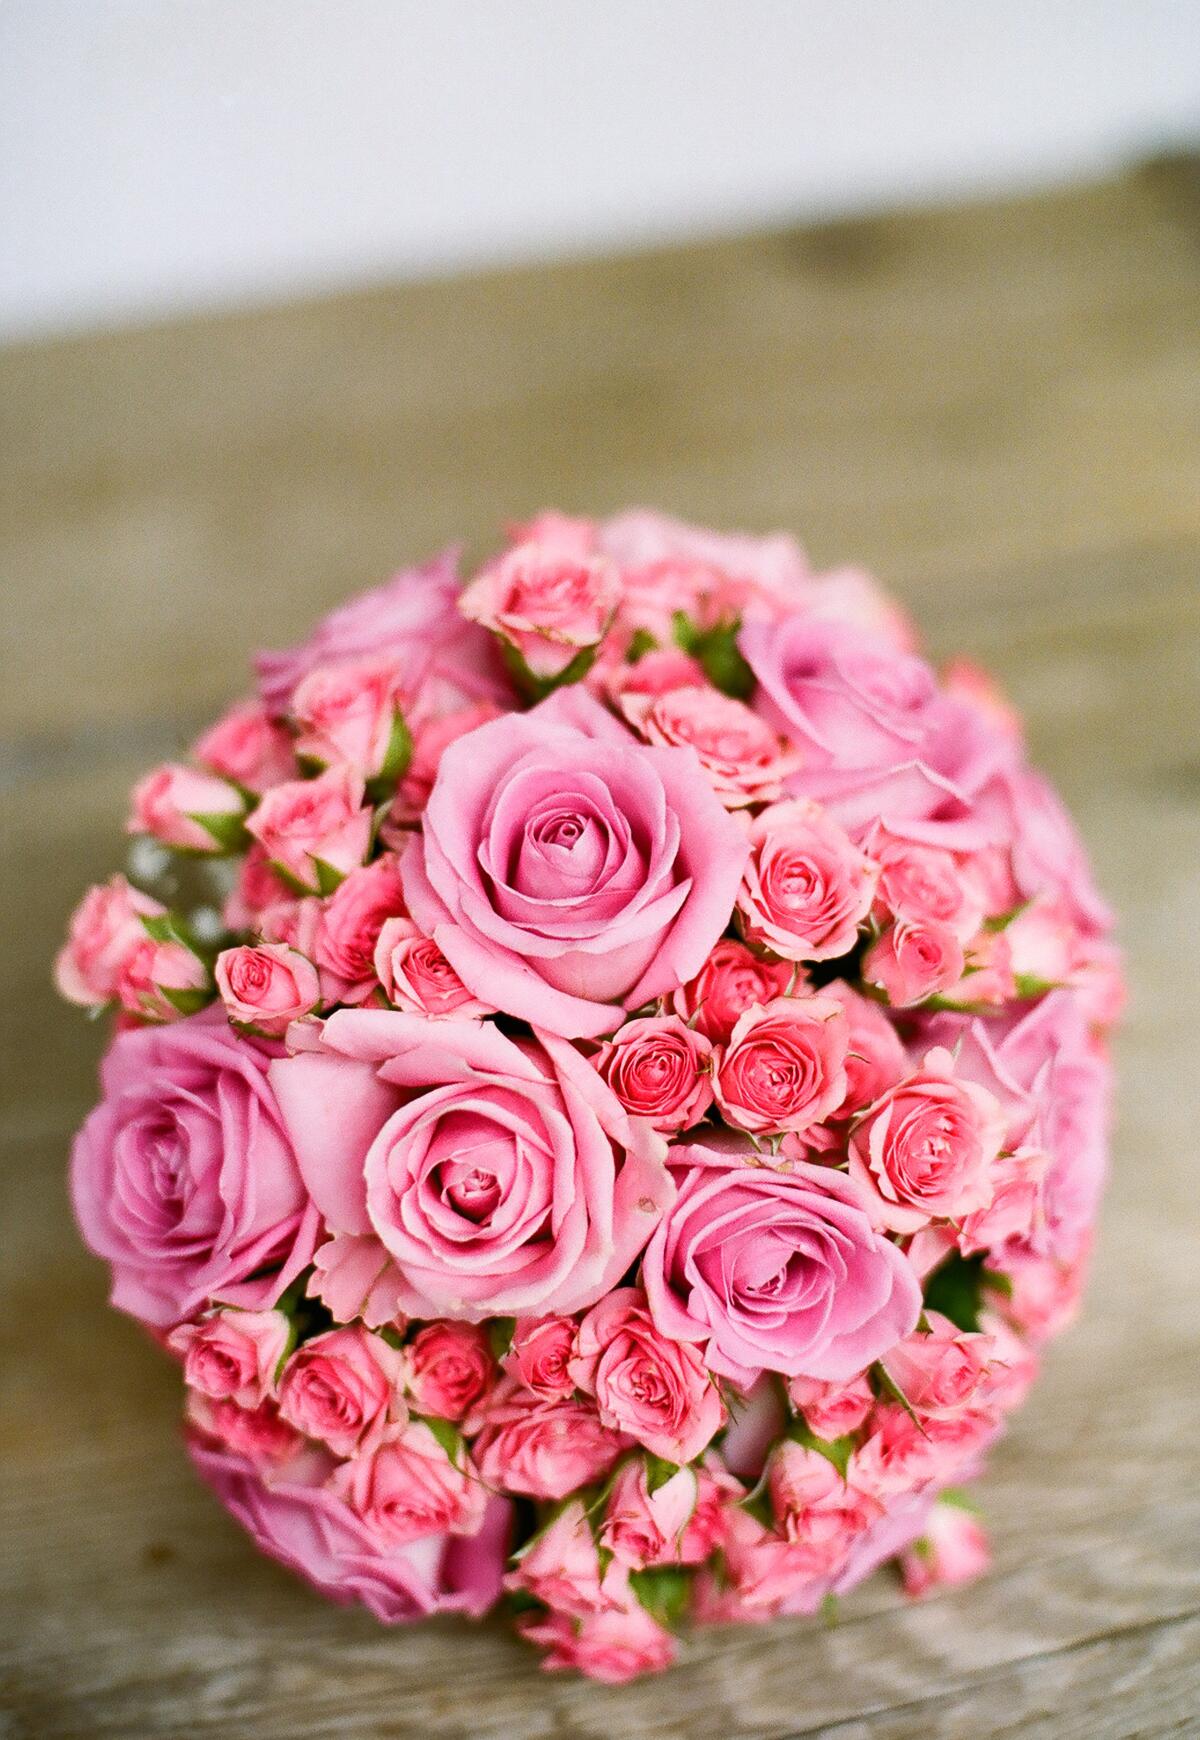 A beautiful bouquet of pink roses